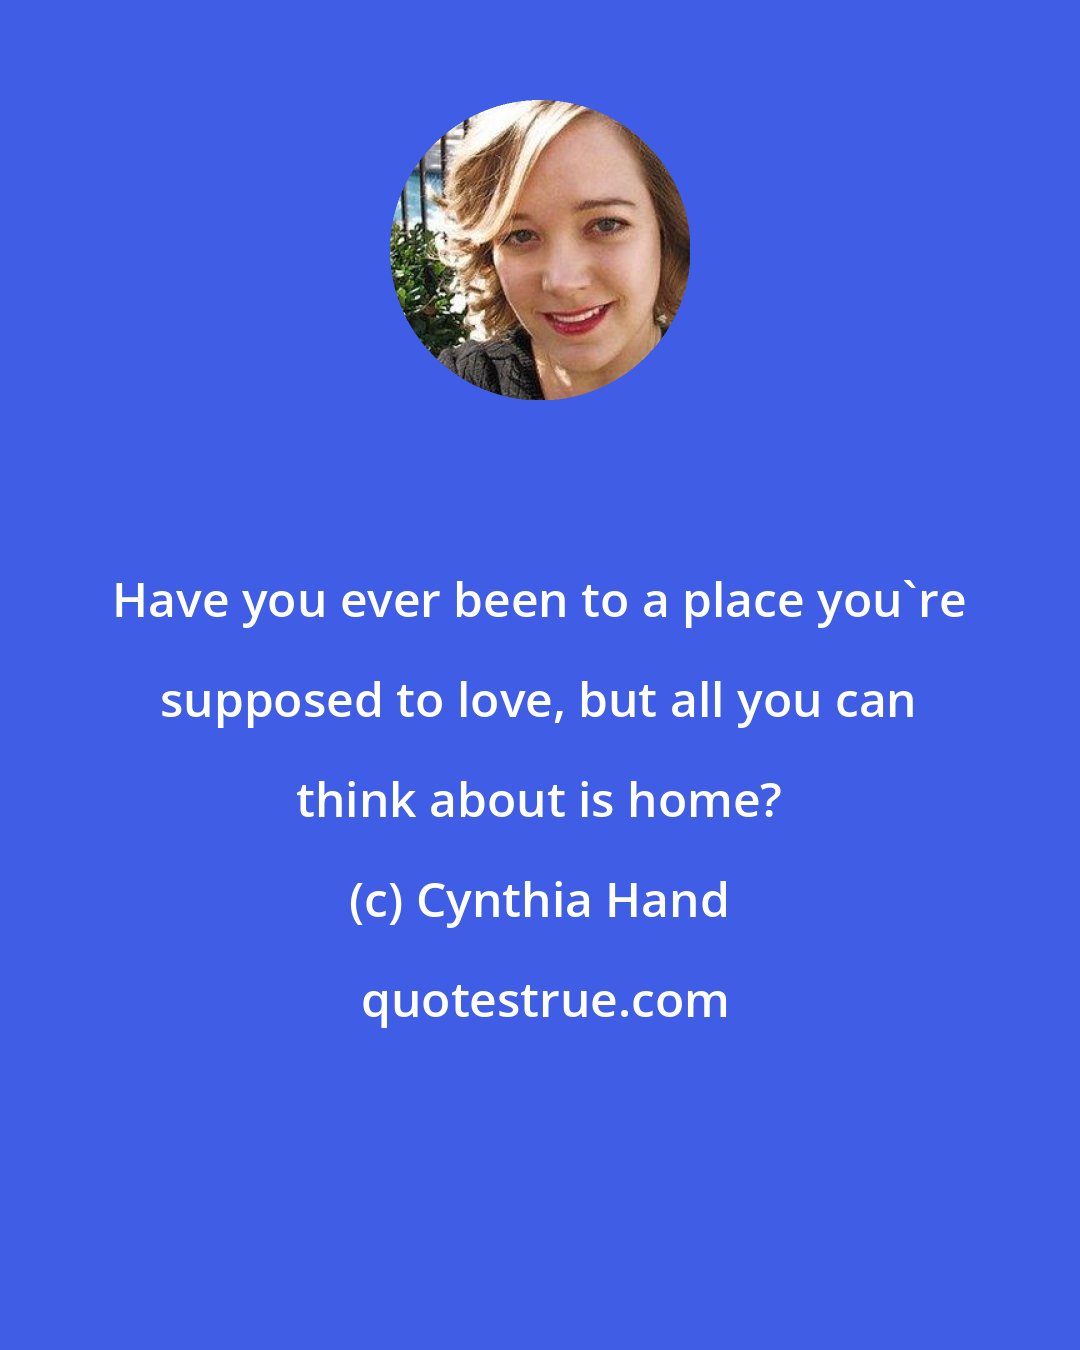 Cynthia Hand: Have you ever been to a place you're supposed to love, but all you can think about is home?